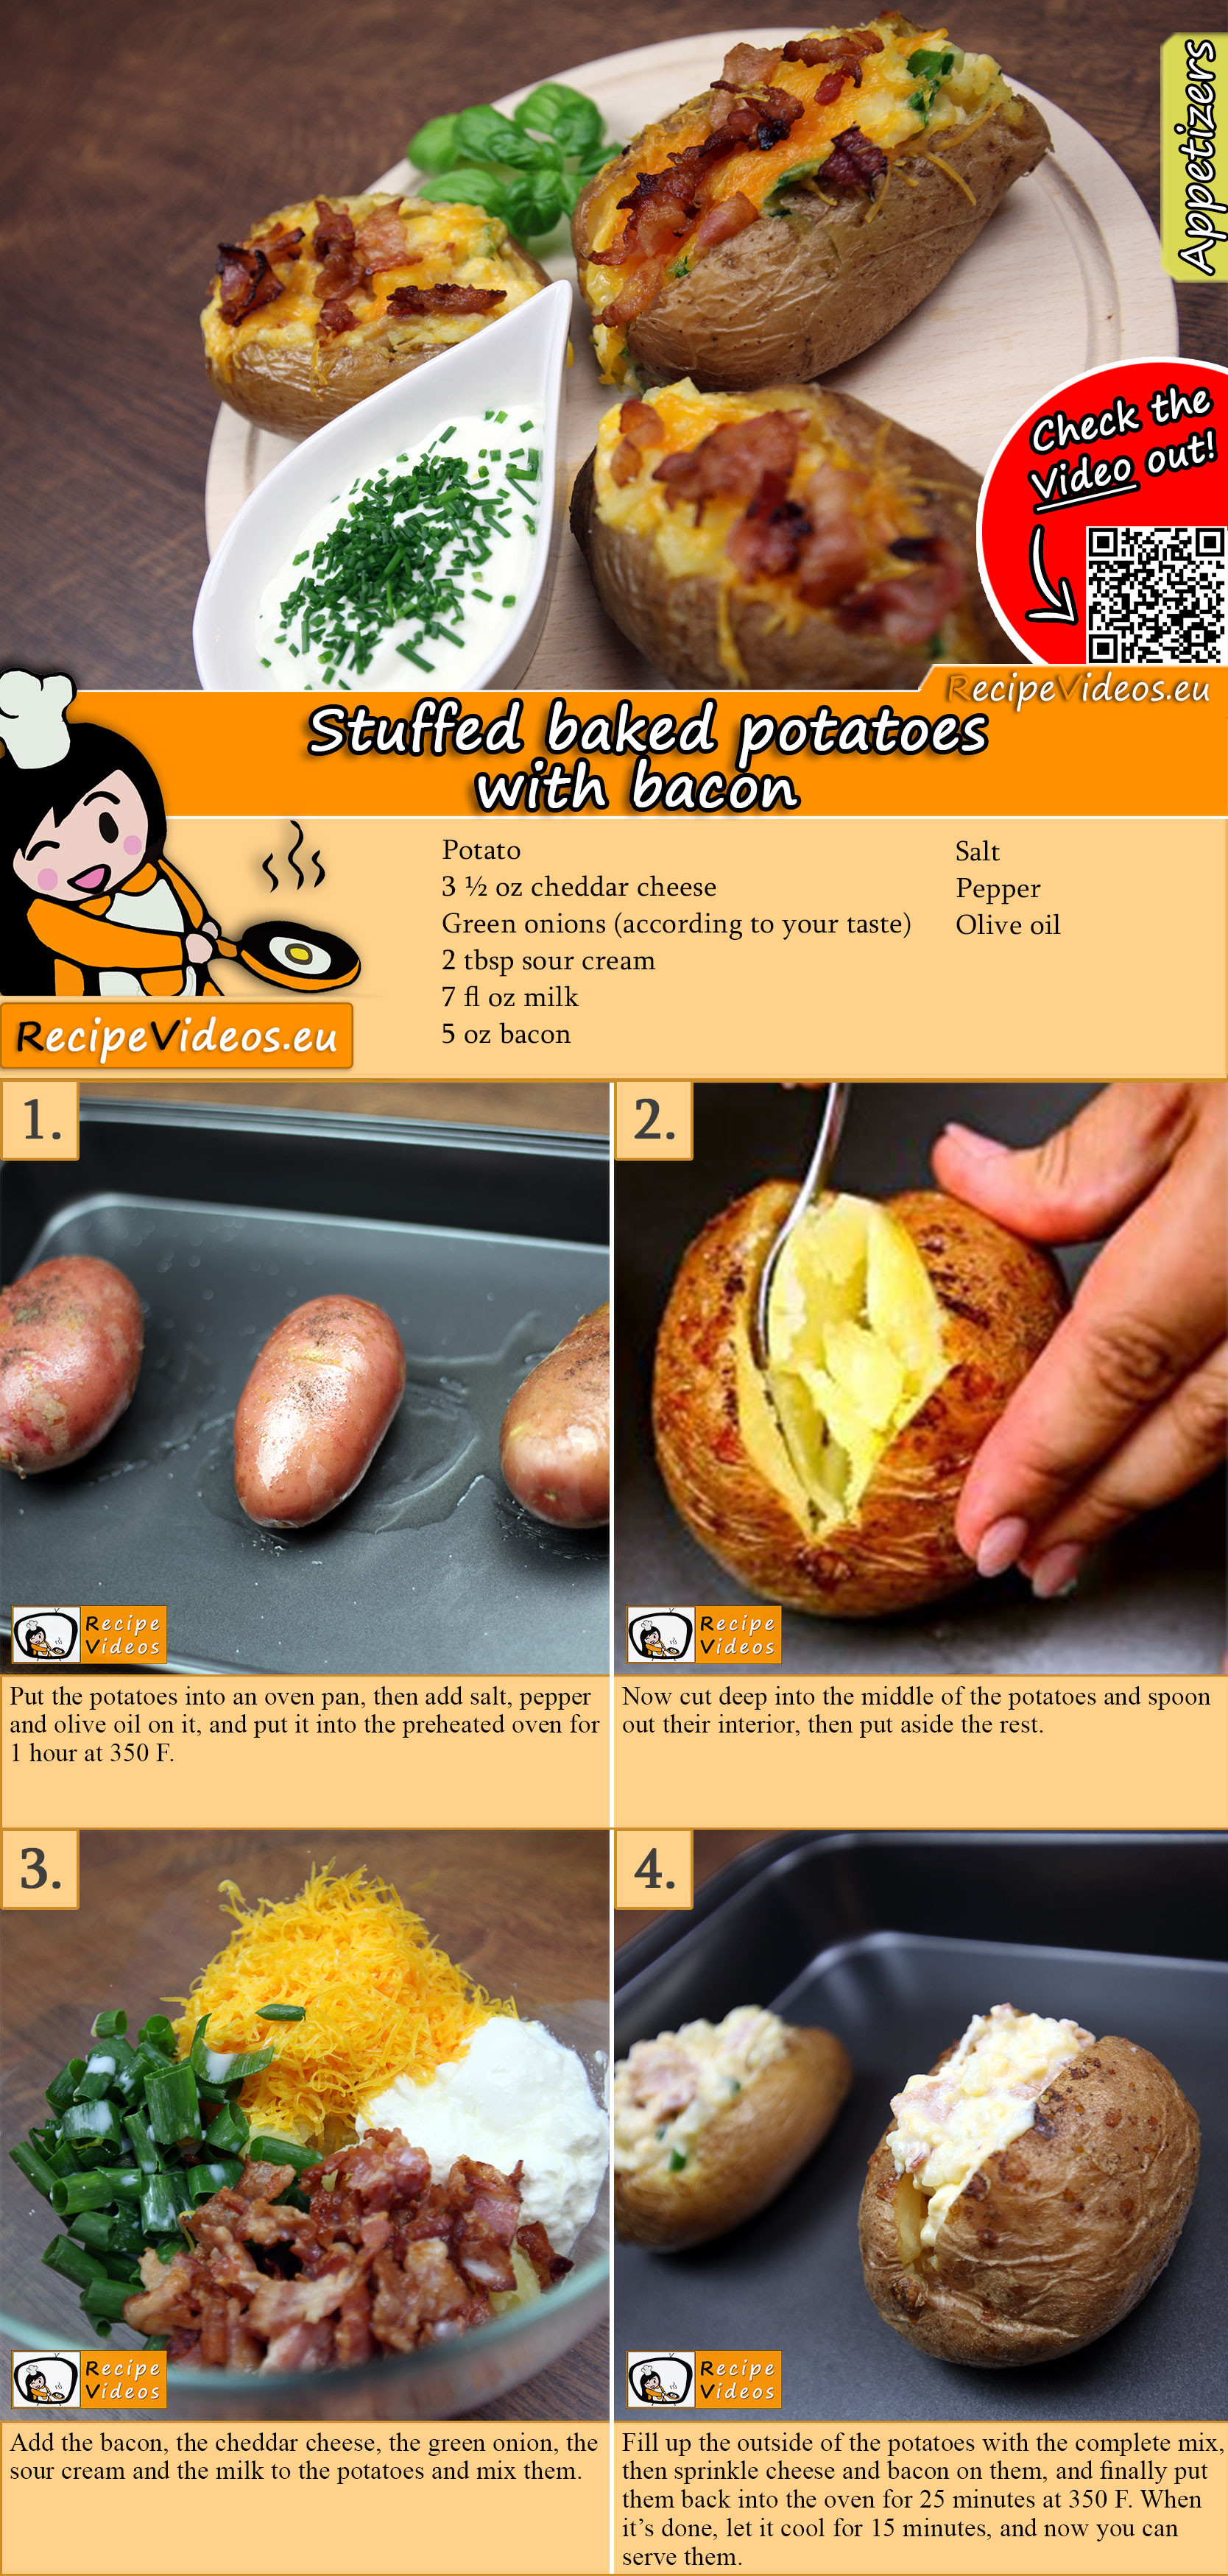 Stuffed baked potatoes with bacon recipe with video